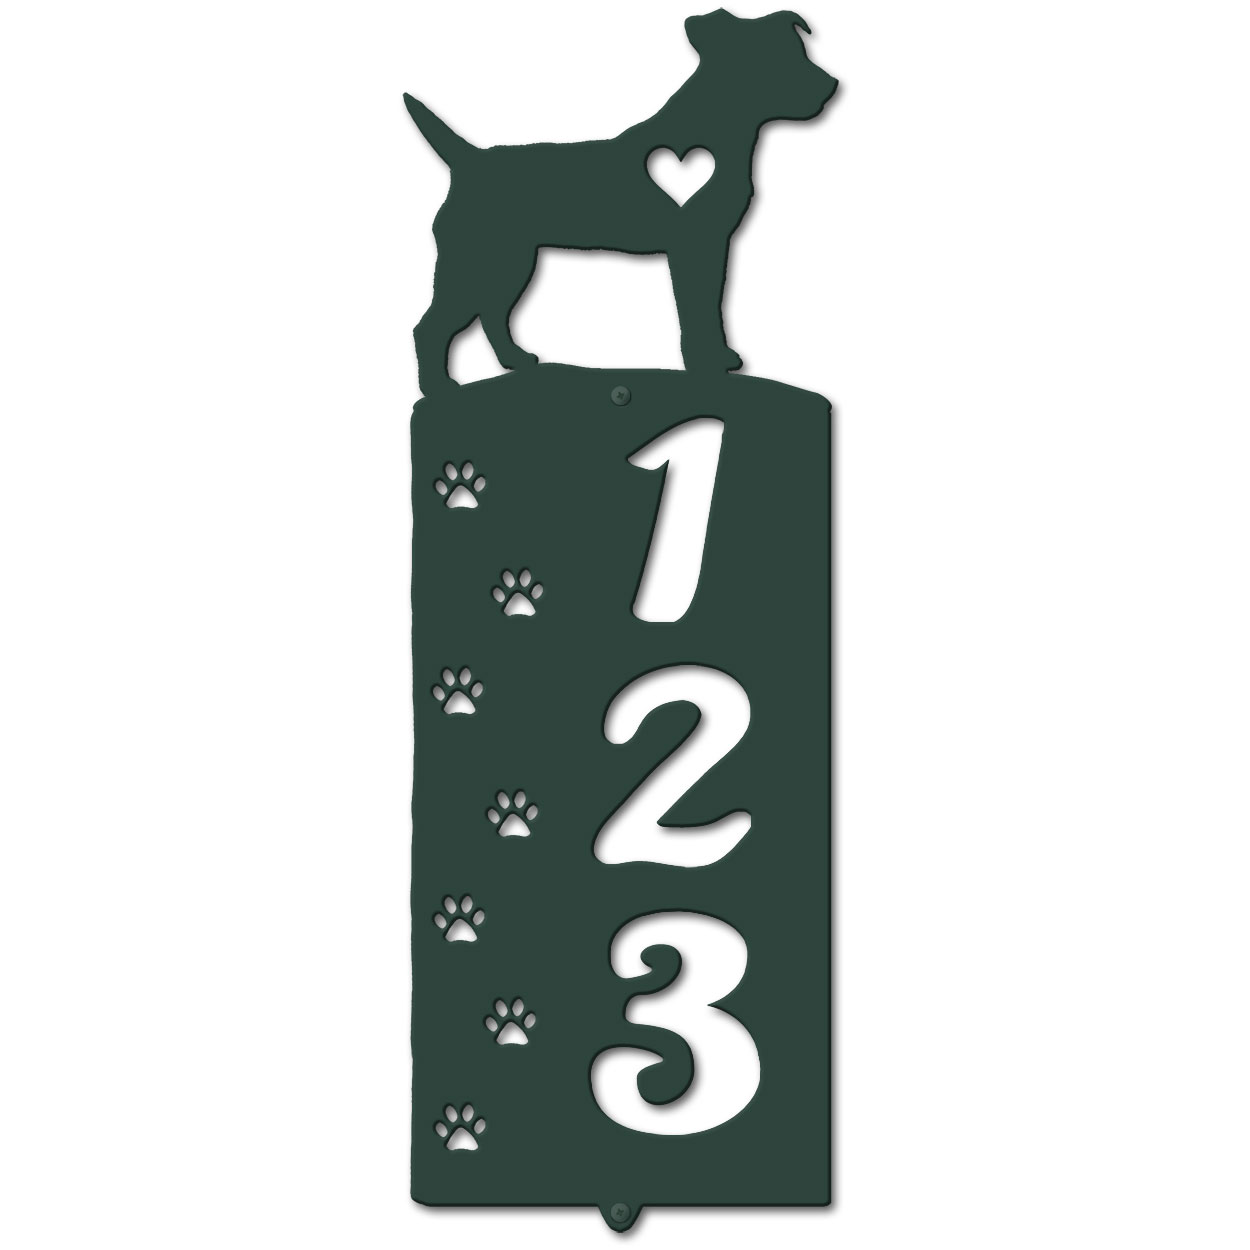 636253 - Jack Russell Terrier Cut-Outs Three Digit Address Number Plaque - Choose Size and Color